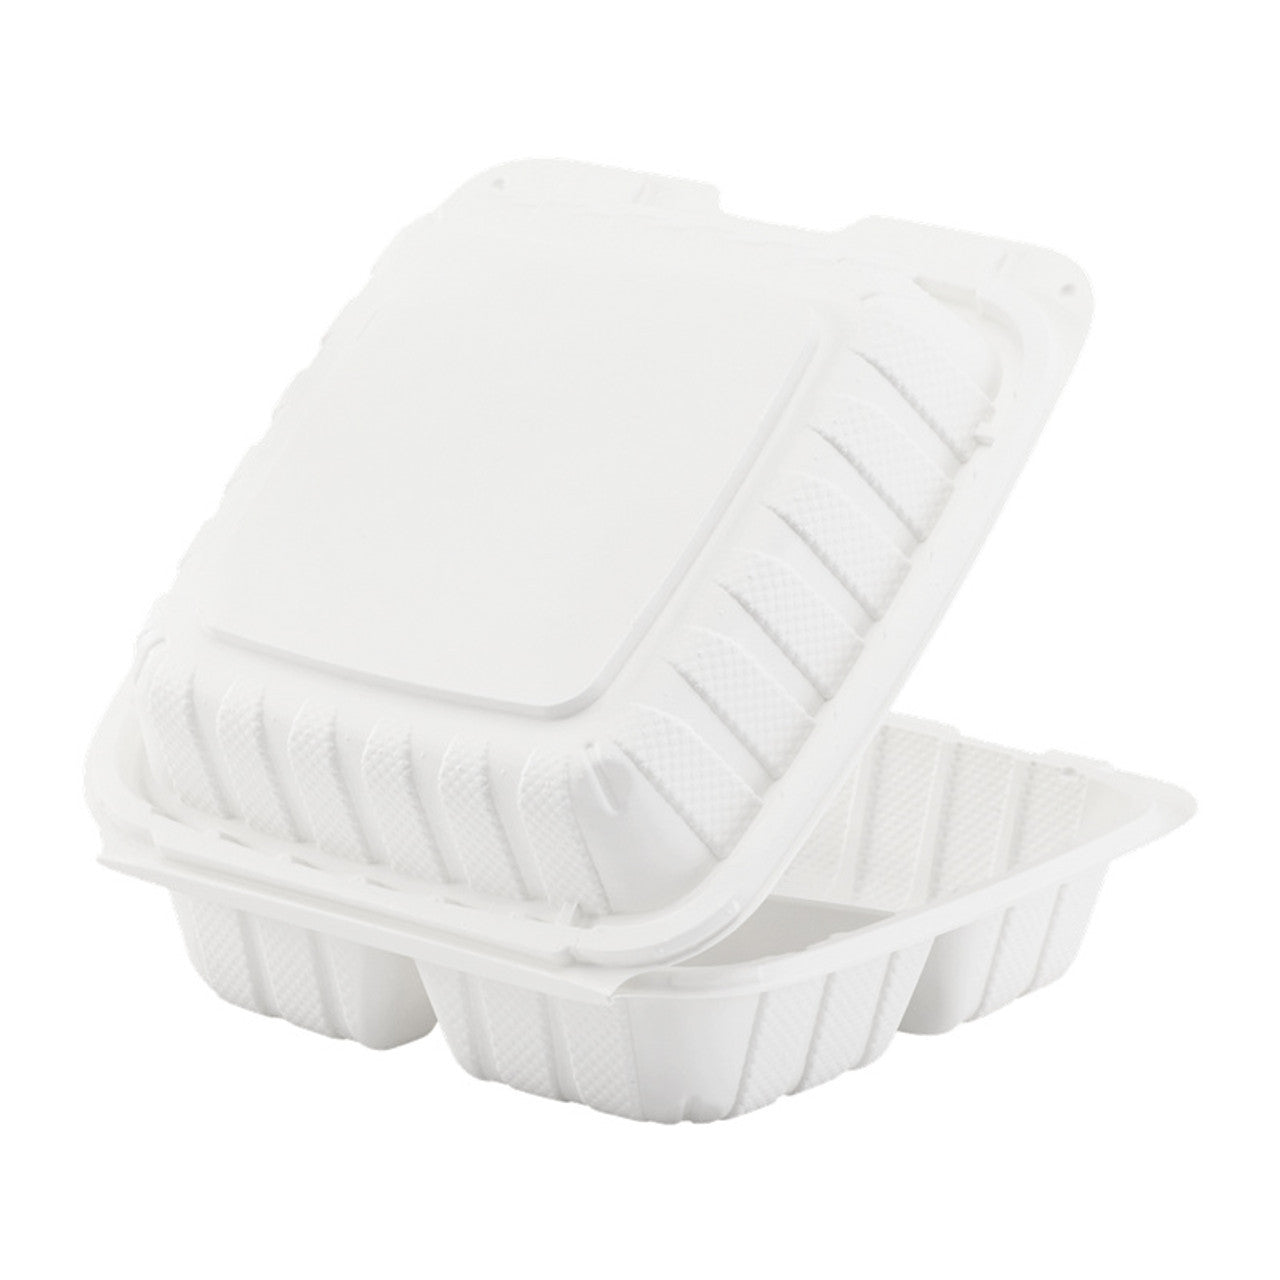 8" 3 Compartments Plastic Clamshell Food Containers 150 pcs